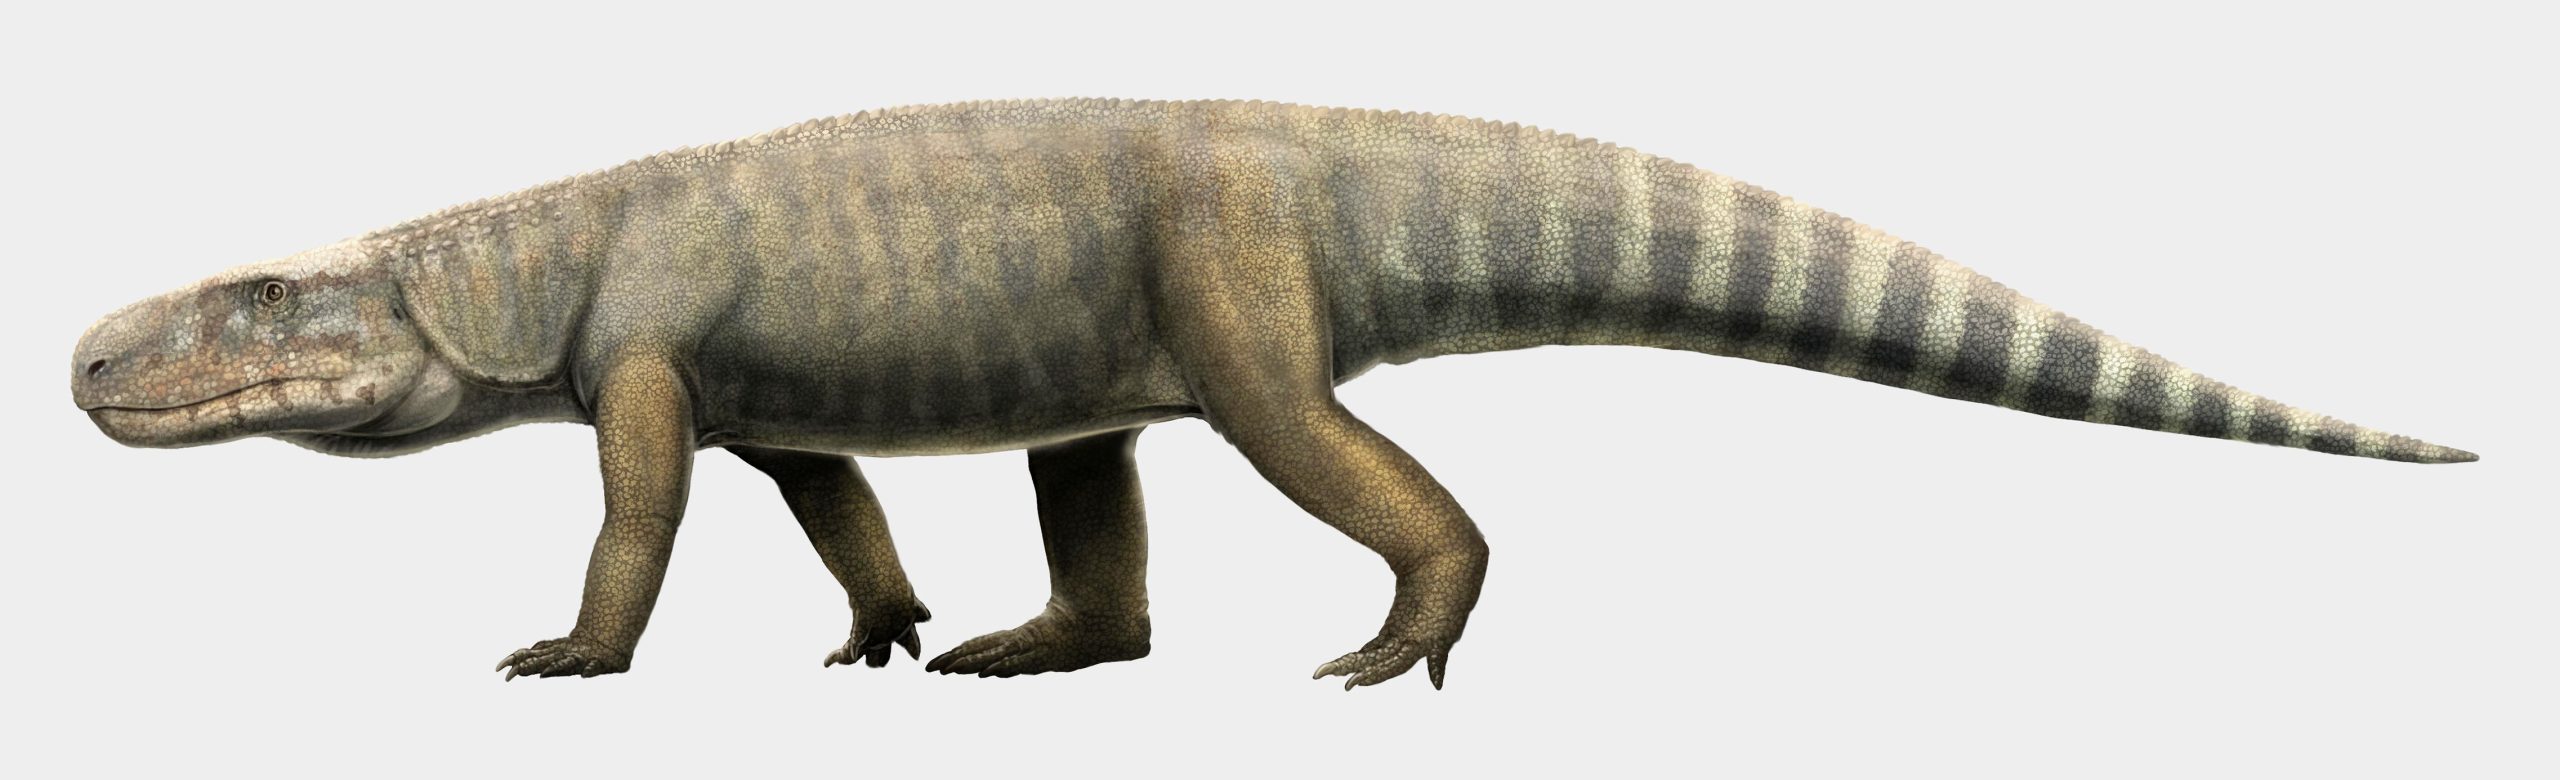 Triassic Archosaur Fossils Excavated in the 1960s Add Missing Link to Crocodile Evolution